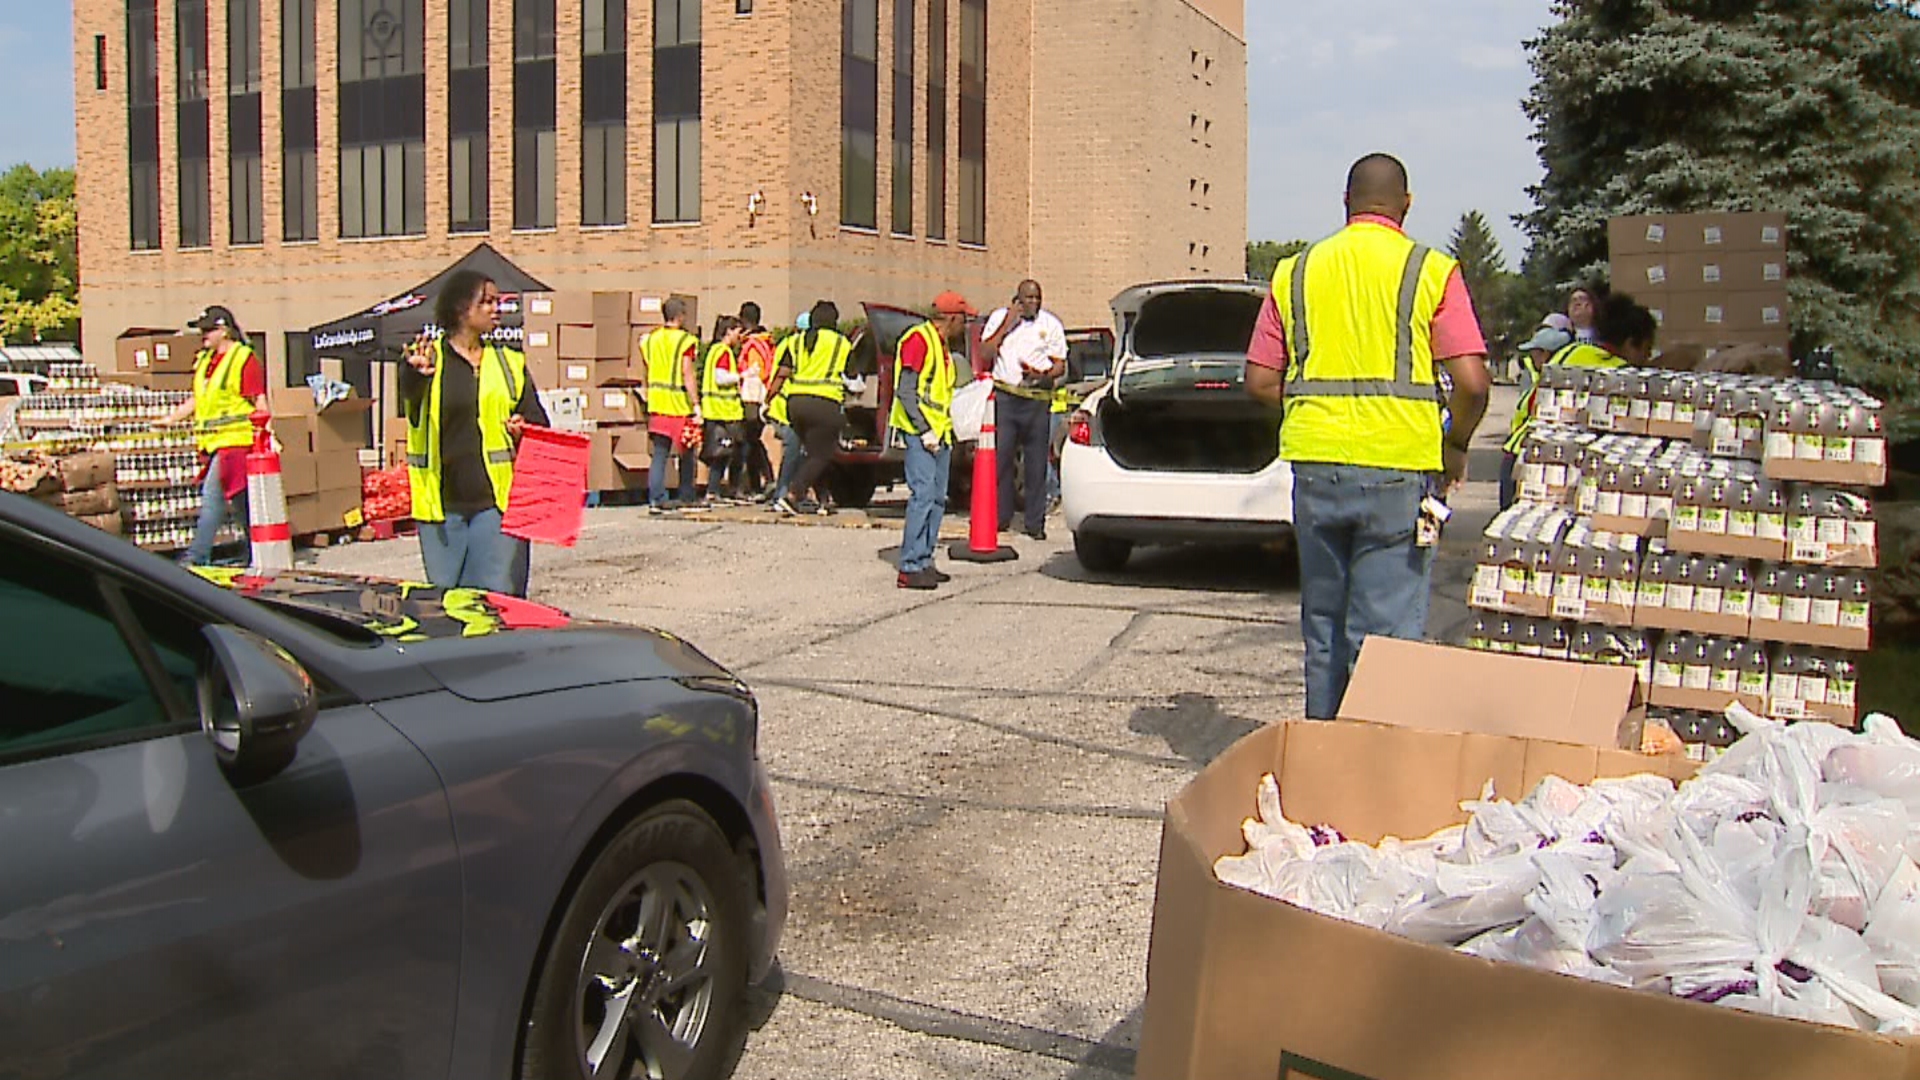 Gun locks handed out at food distribution event